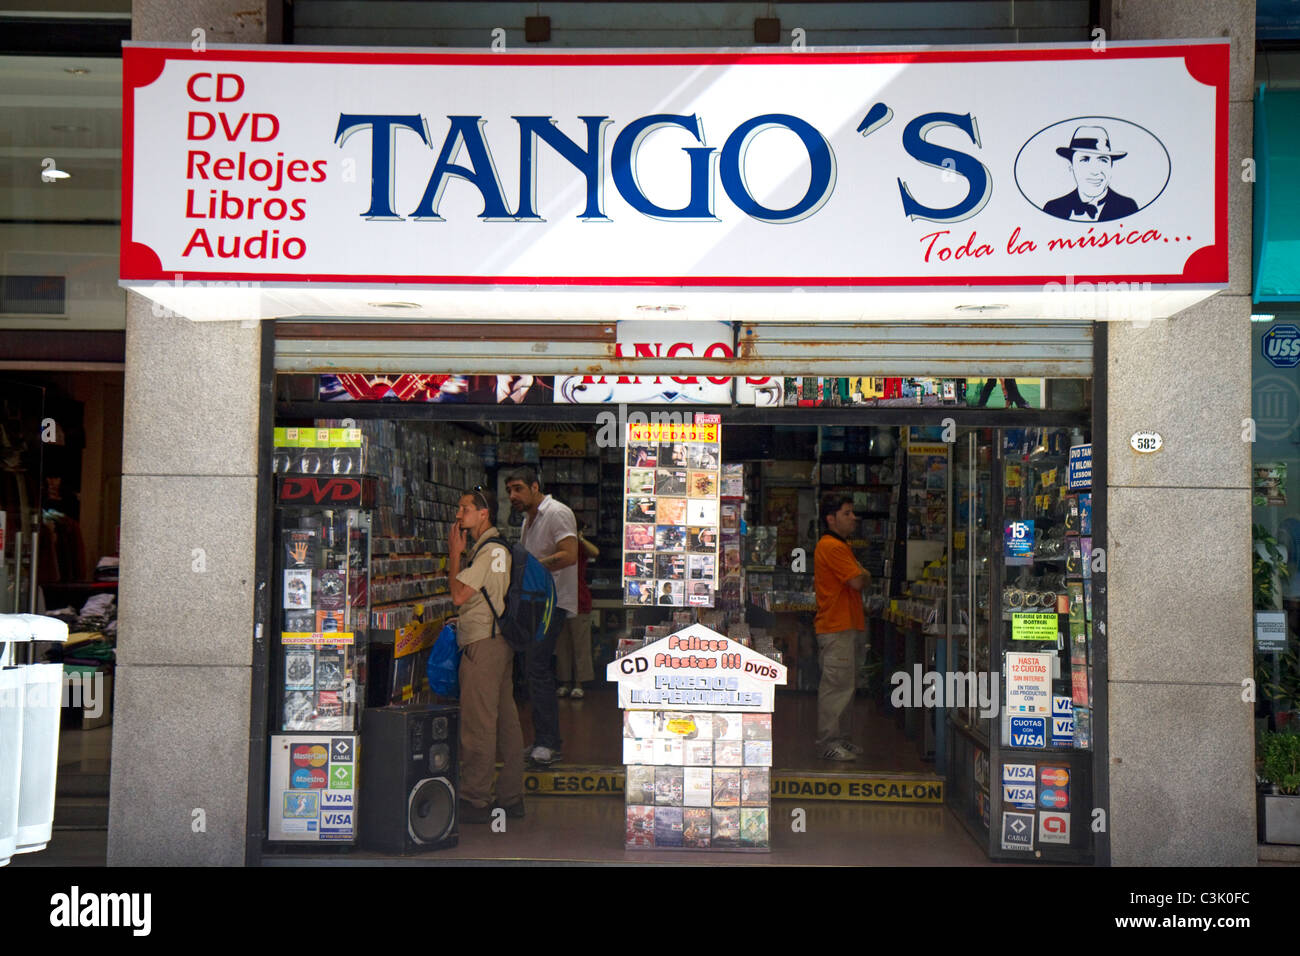 Tango's music store in Buenos Aires, Argentina. Stock Photo